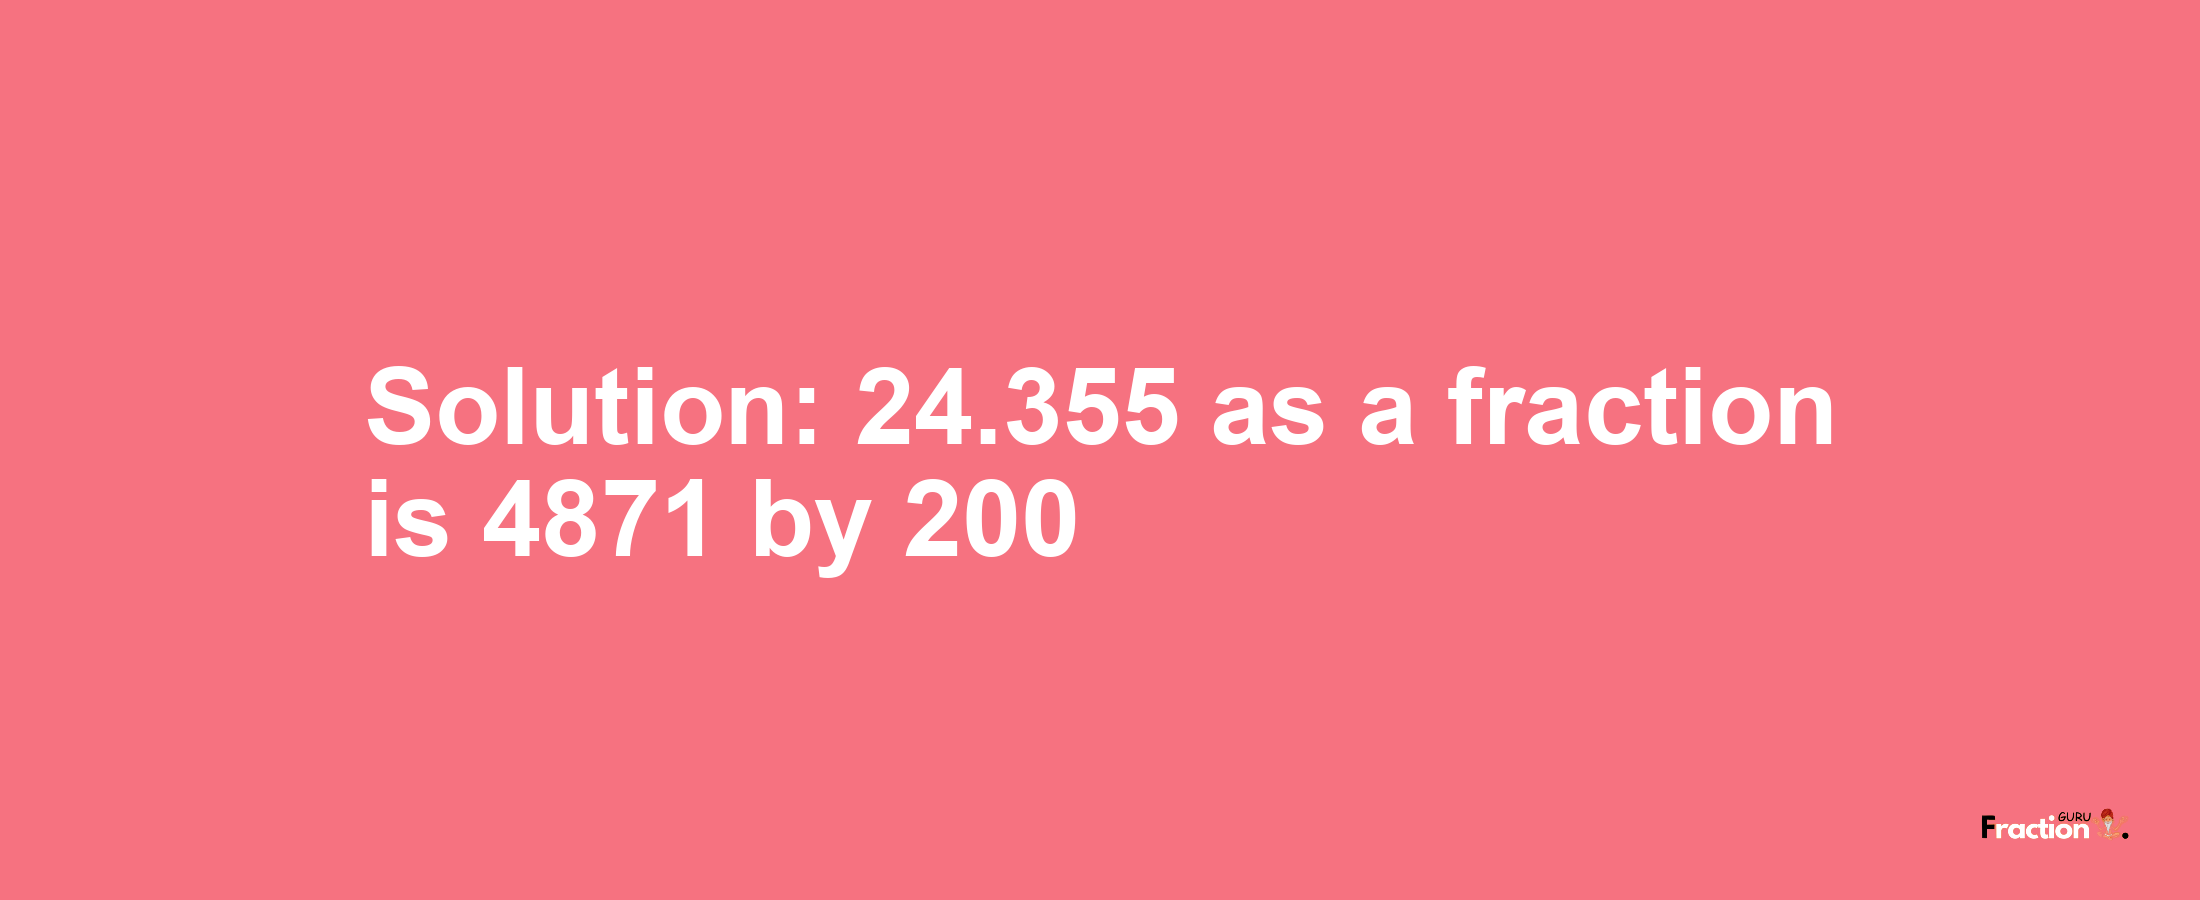 Solution:24.355 as a fraction is 4871/200